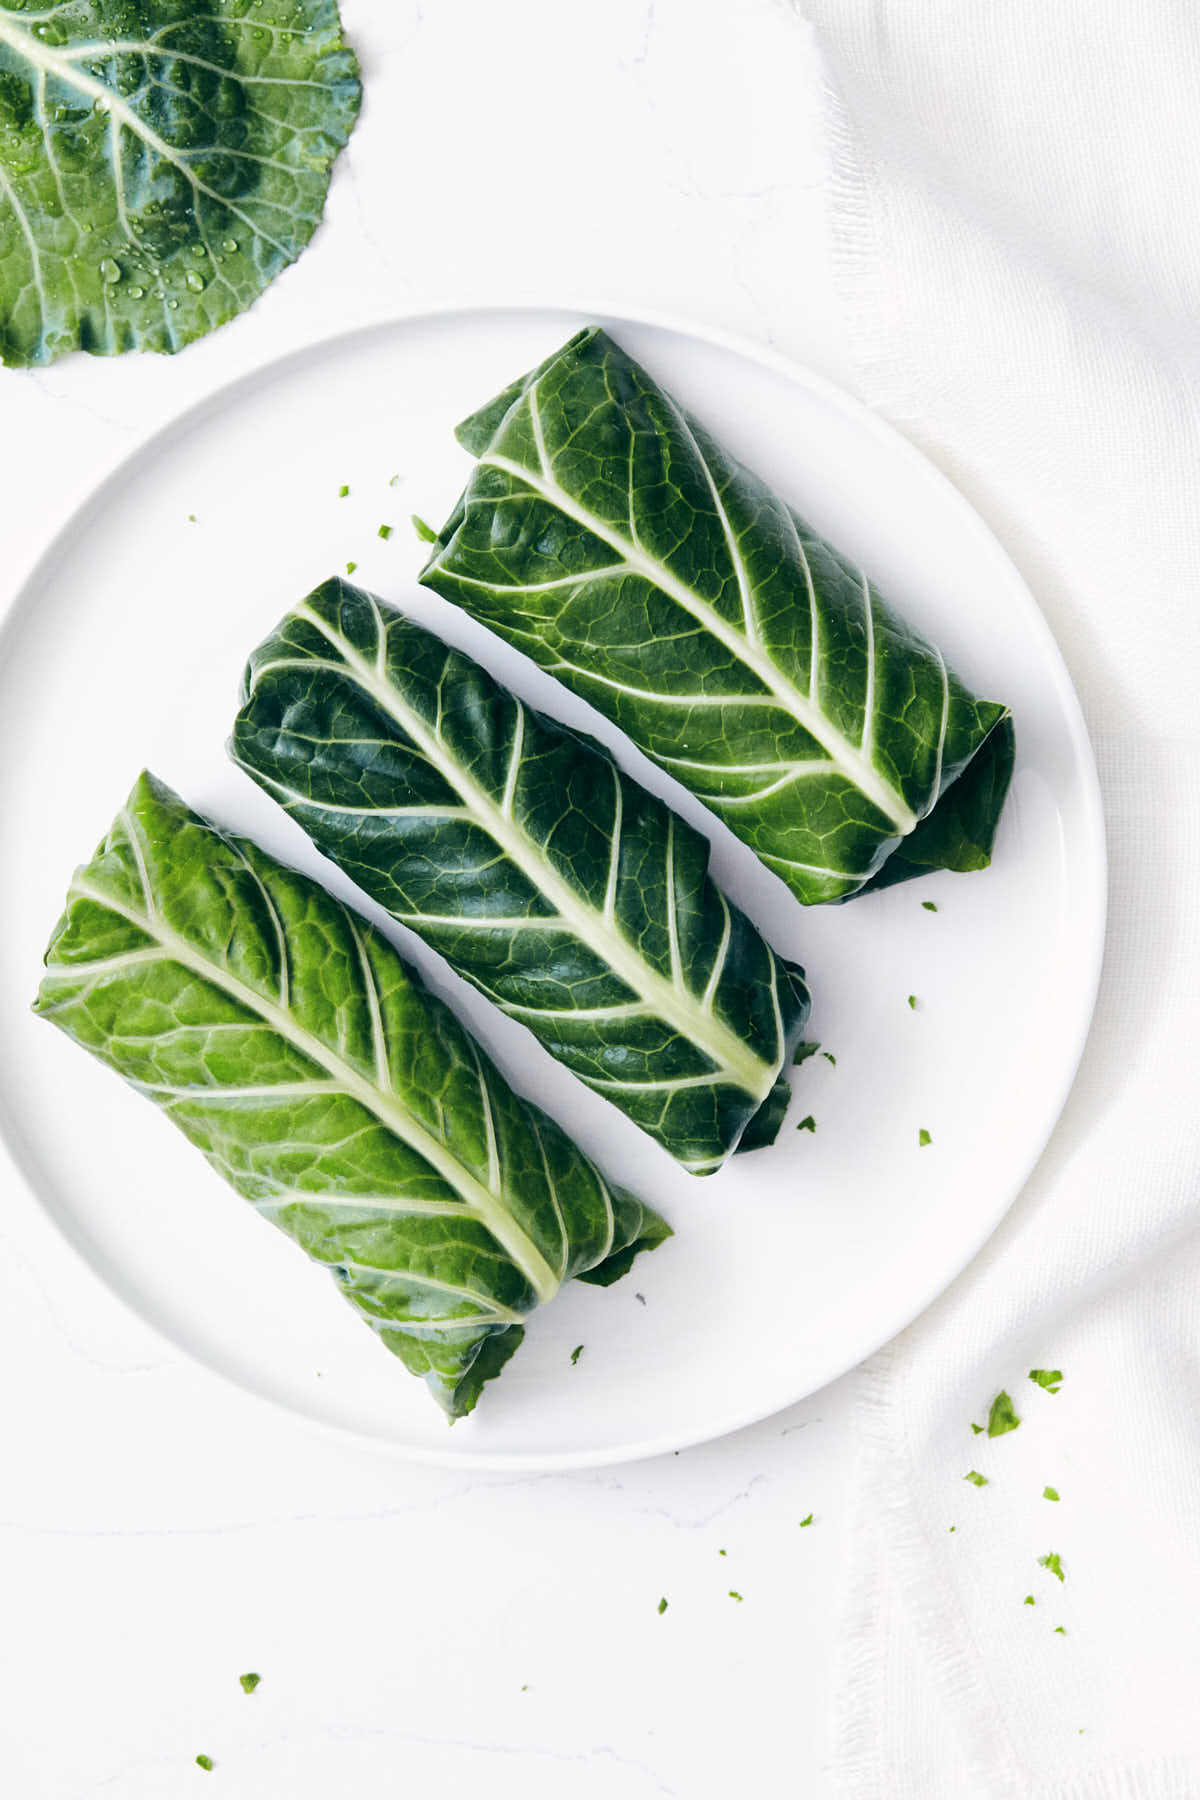 Rolled green collard wraps on a plate pre-cut